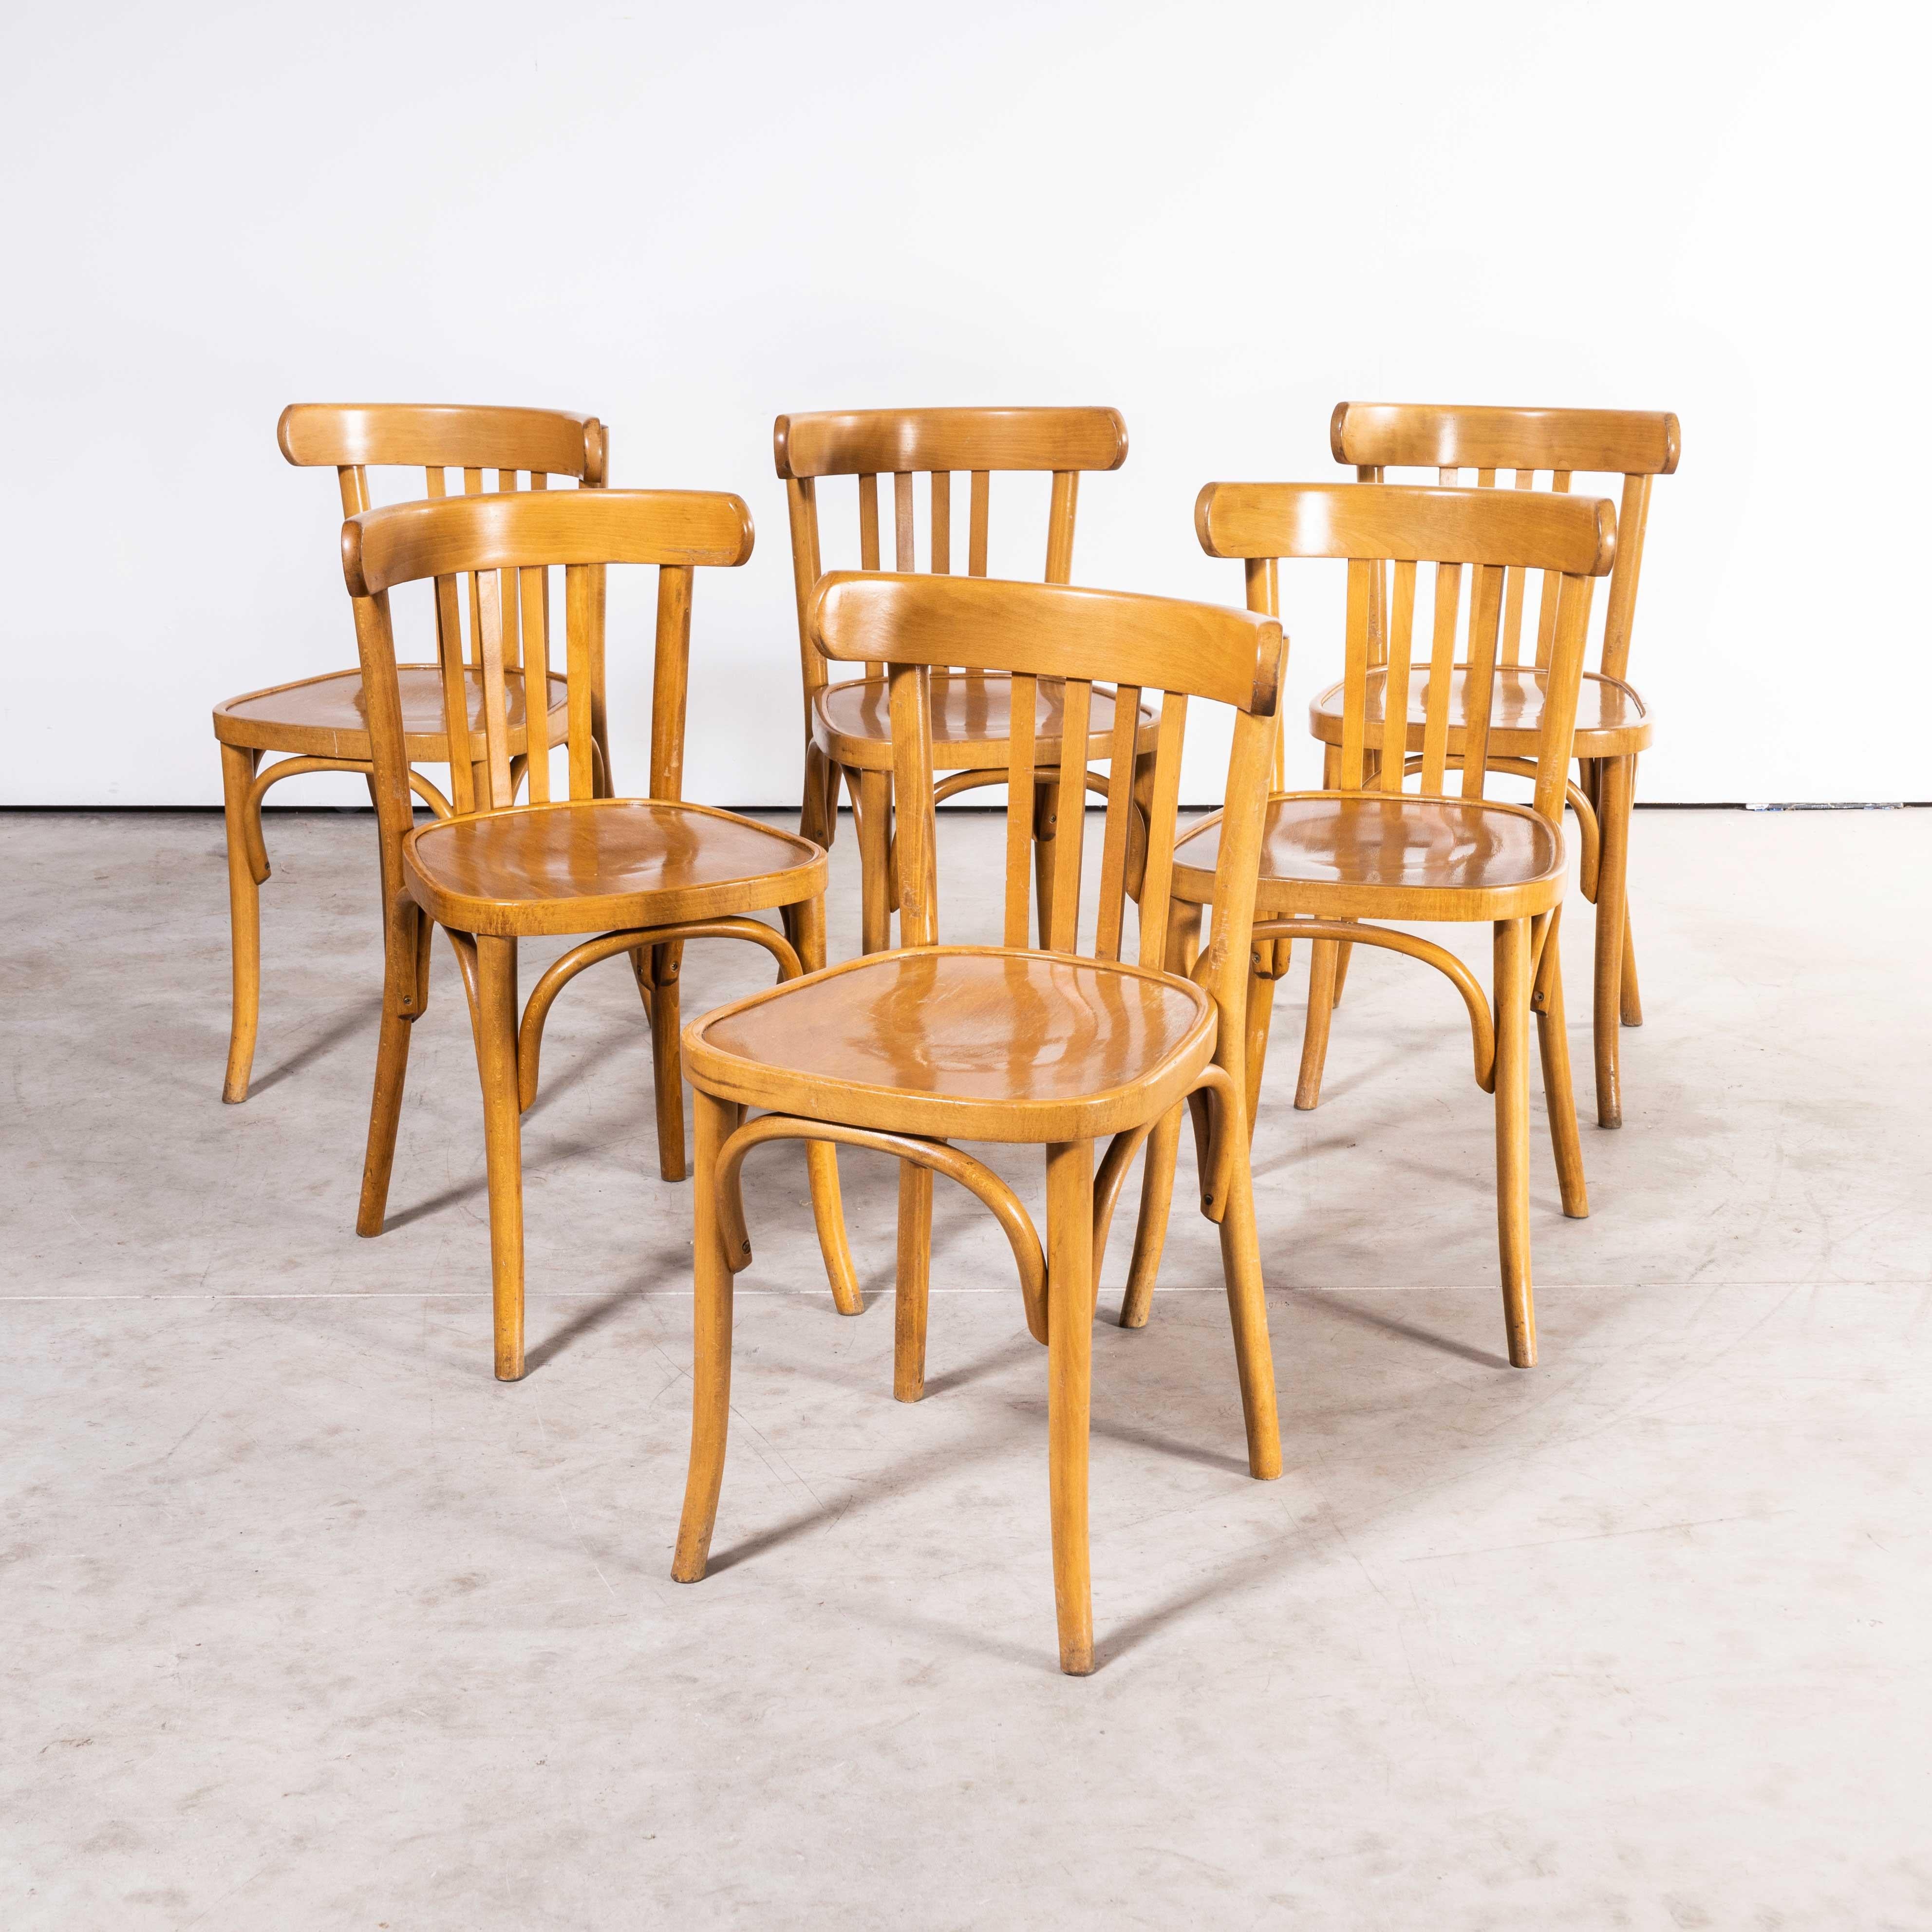 1970’s Bentwood honey beech bentwood dining chairs – set of six
1970’s Bentwood honey beech bentwood dining chairs – set of six. Sourced in France these are late production chairs from a traditional bentwood factory in Eastern Europe. High quality